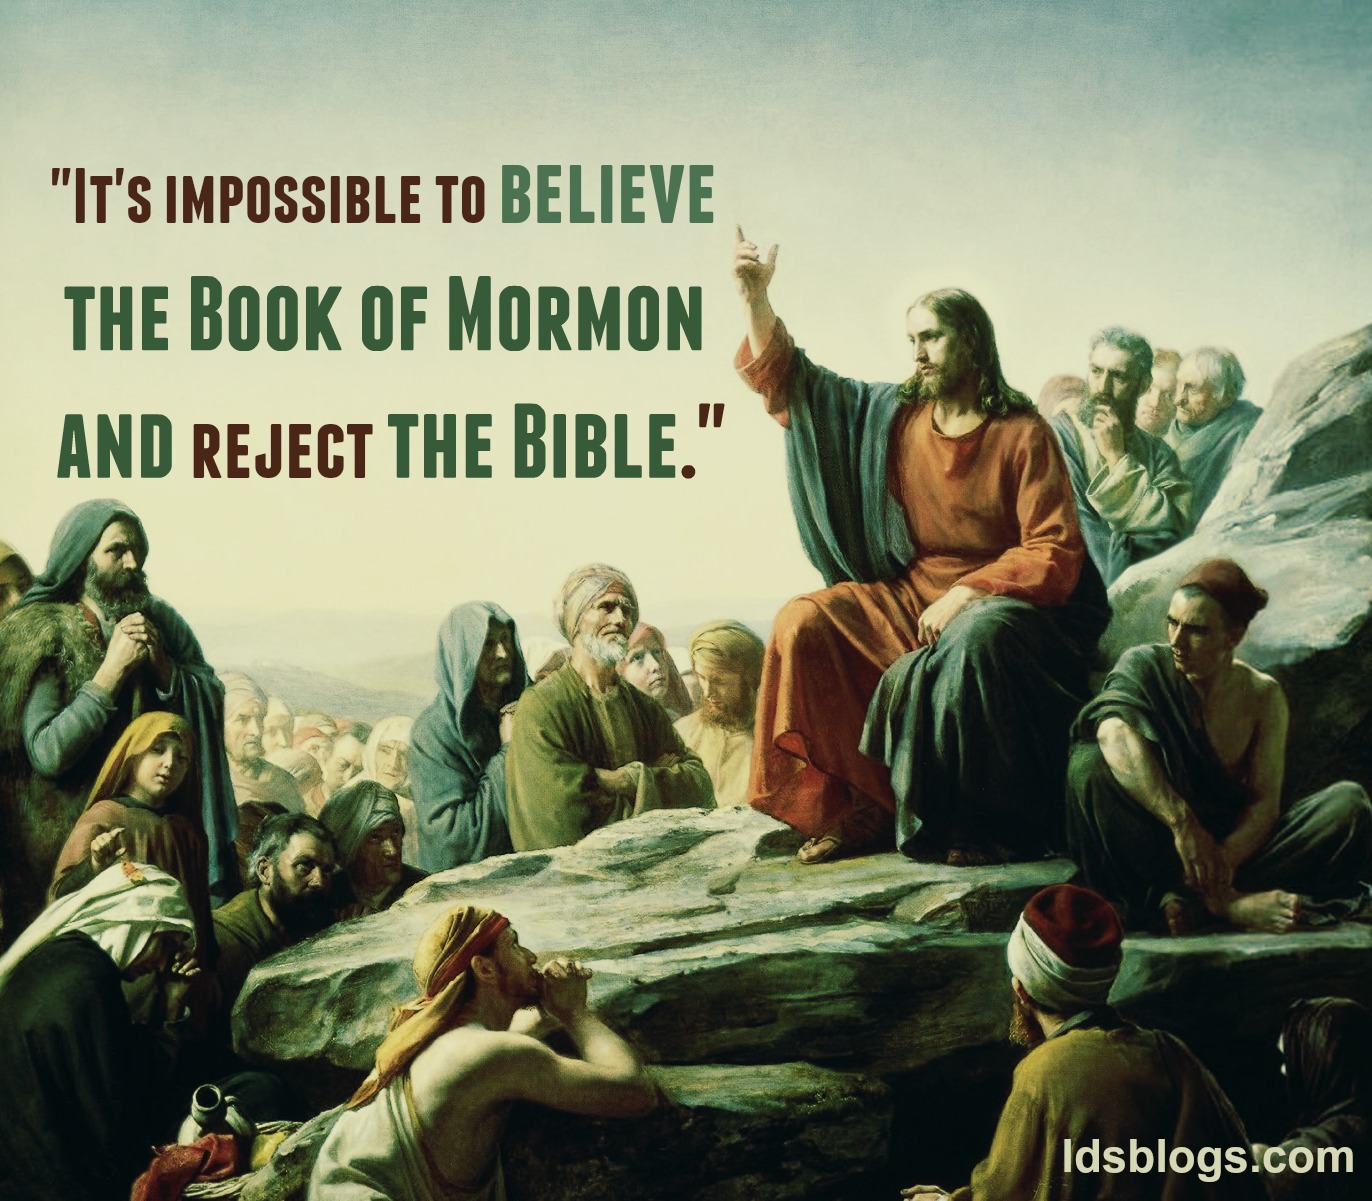 It's impossible to believe the Book of Mormon and reject the Bible